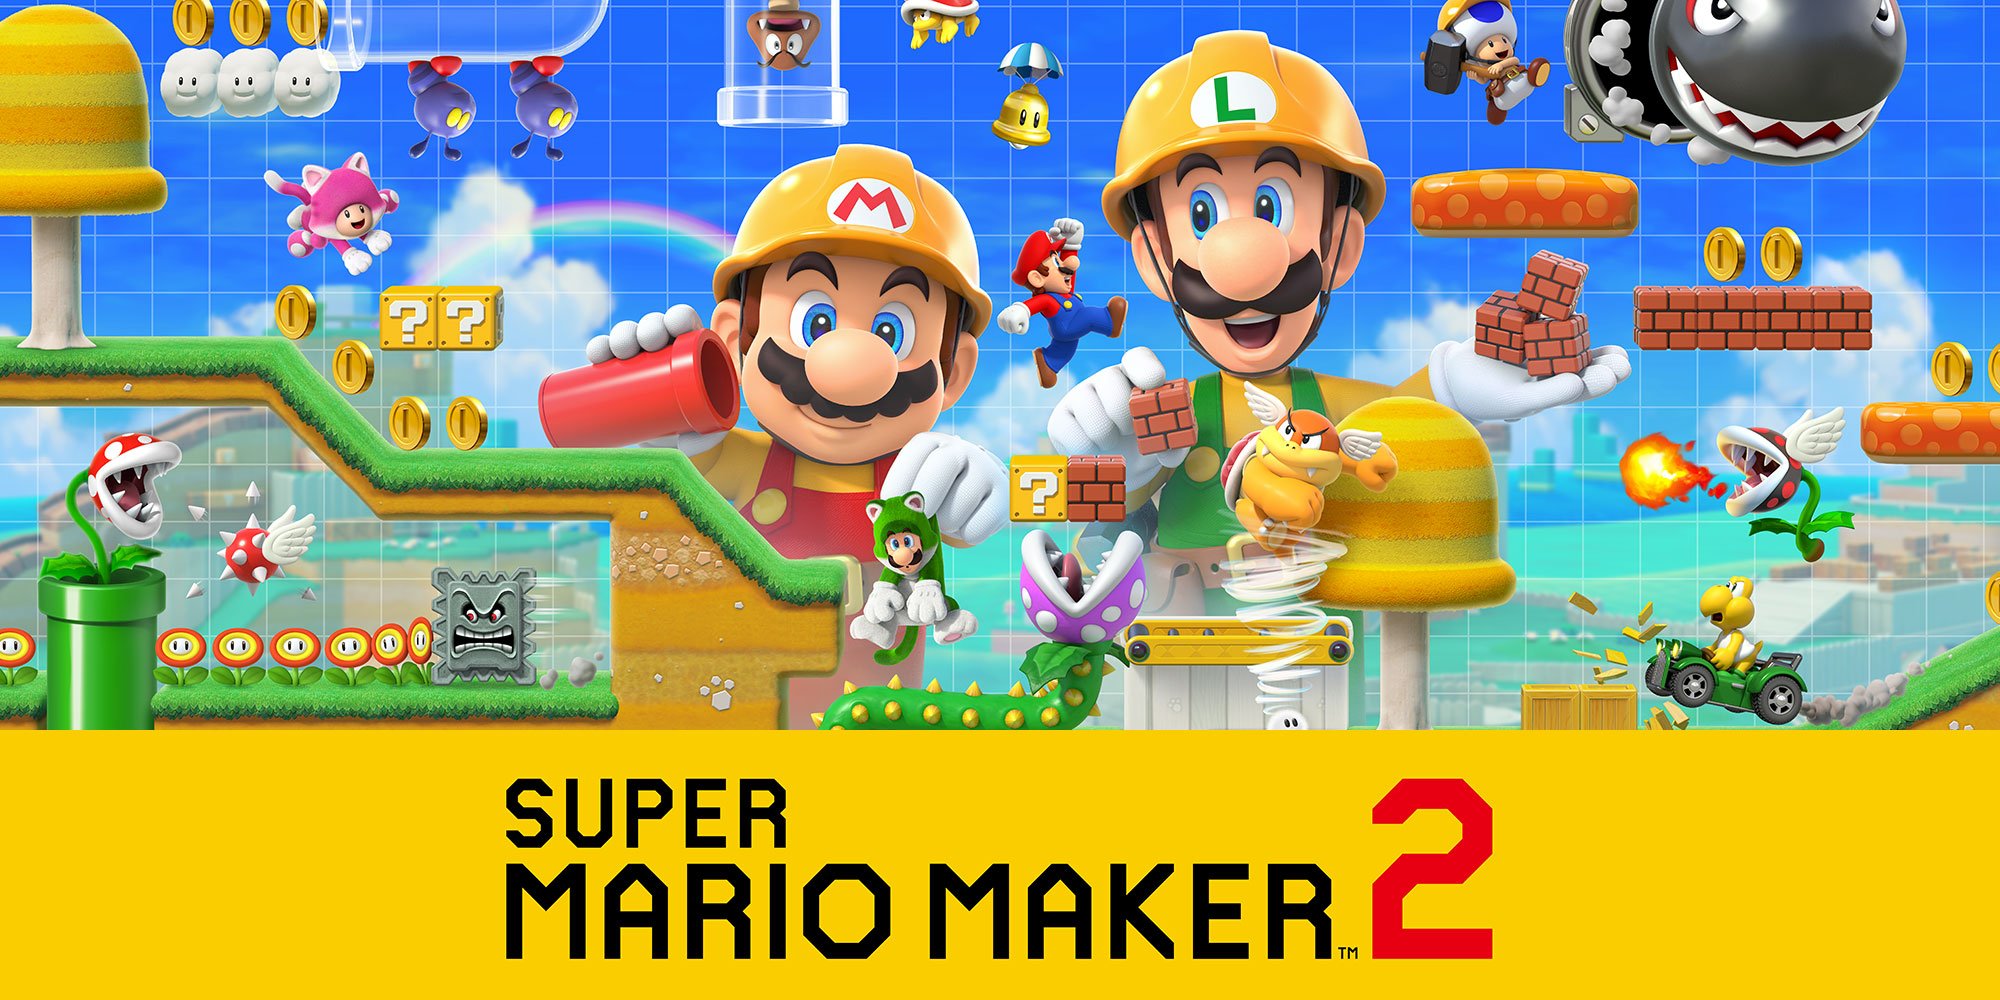 New super mario maker 2 na bgs 2019 | h2x1 nswitch supermariomaker2 1 | mario | mario maker 2 mario